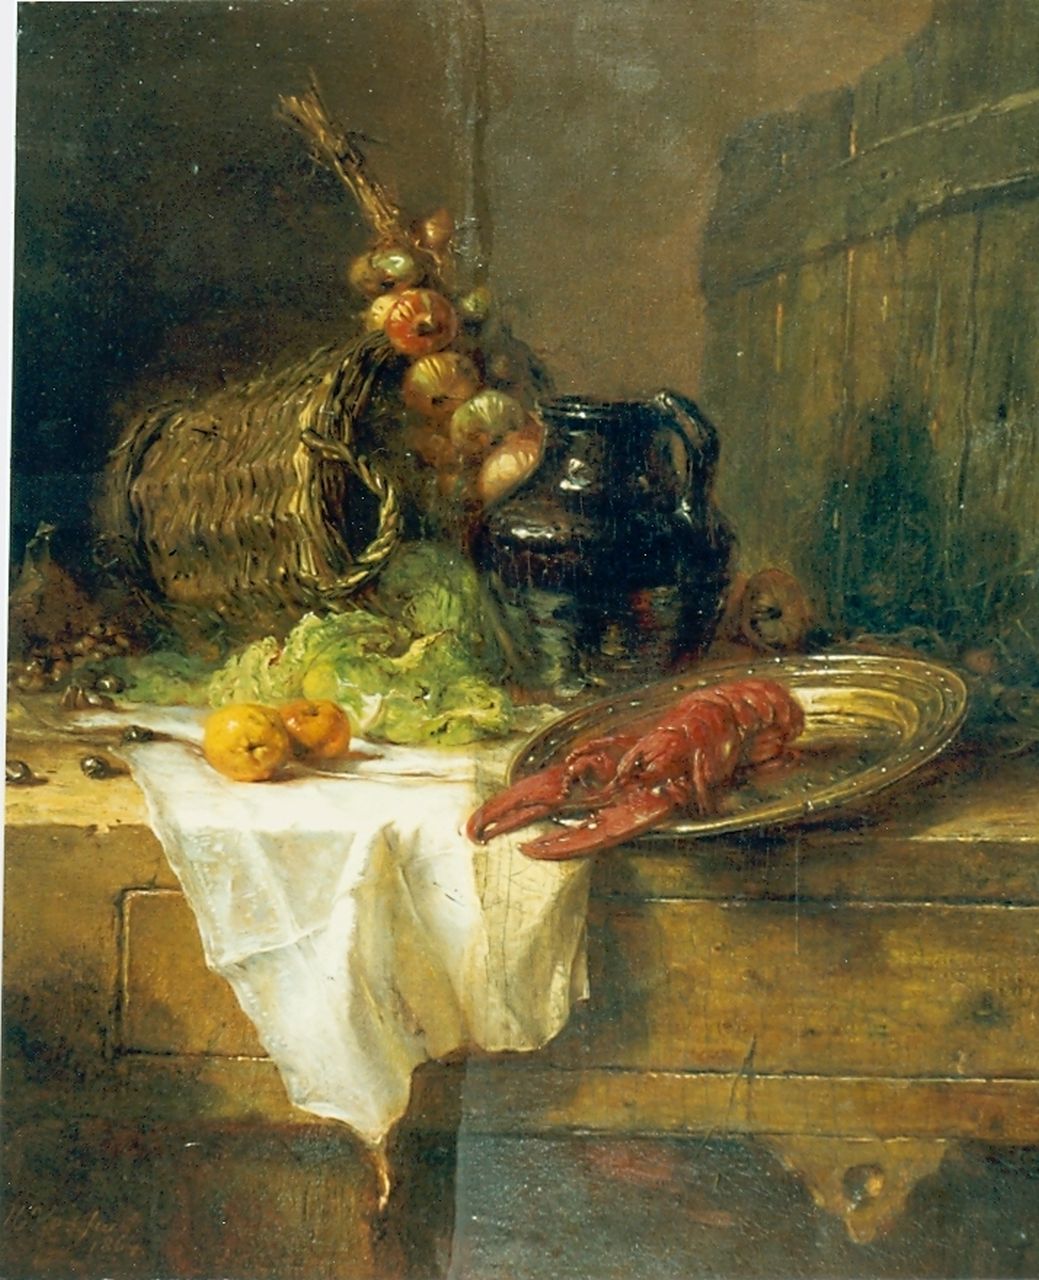 Vos M.  | Maria Vos, Still life, oil on panel 35.0 x 29.5 cm, signed l.l. and dated 1864